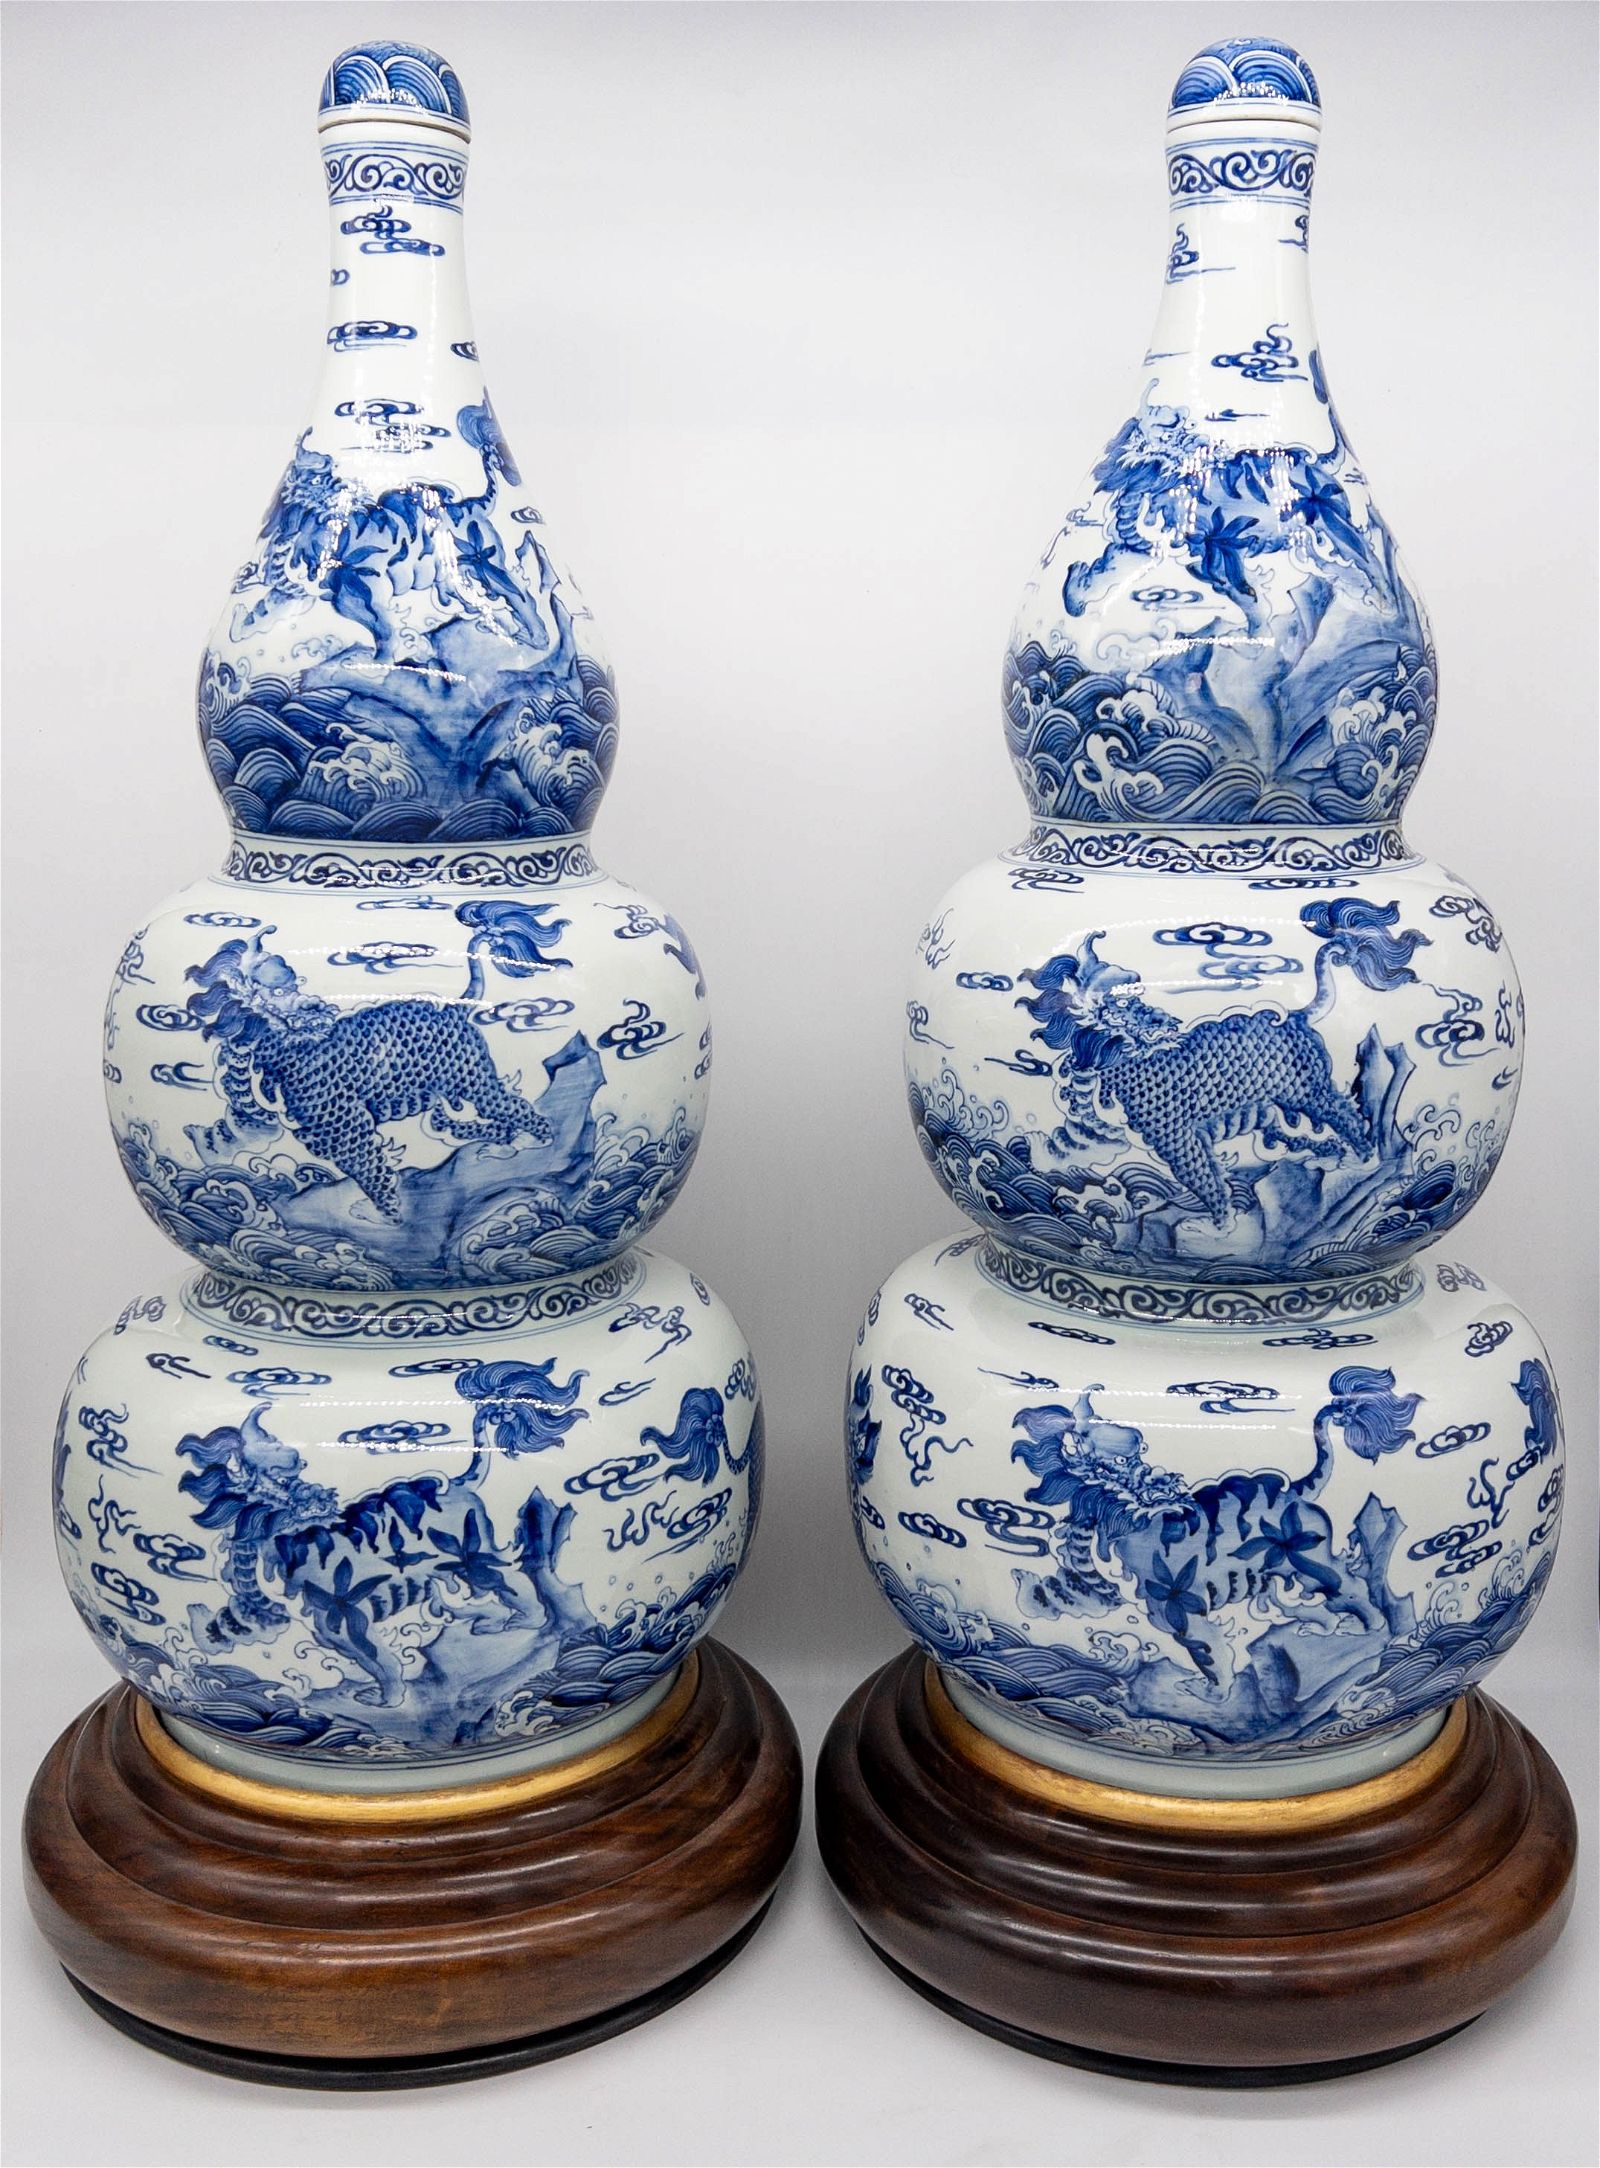 MONUMENTAL CHINESE BLUE AND WHITE